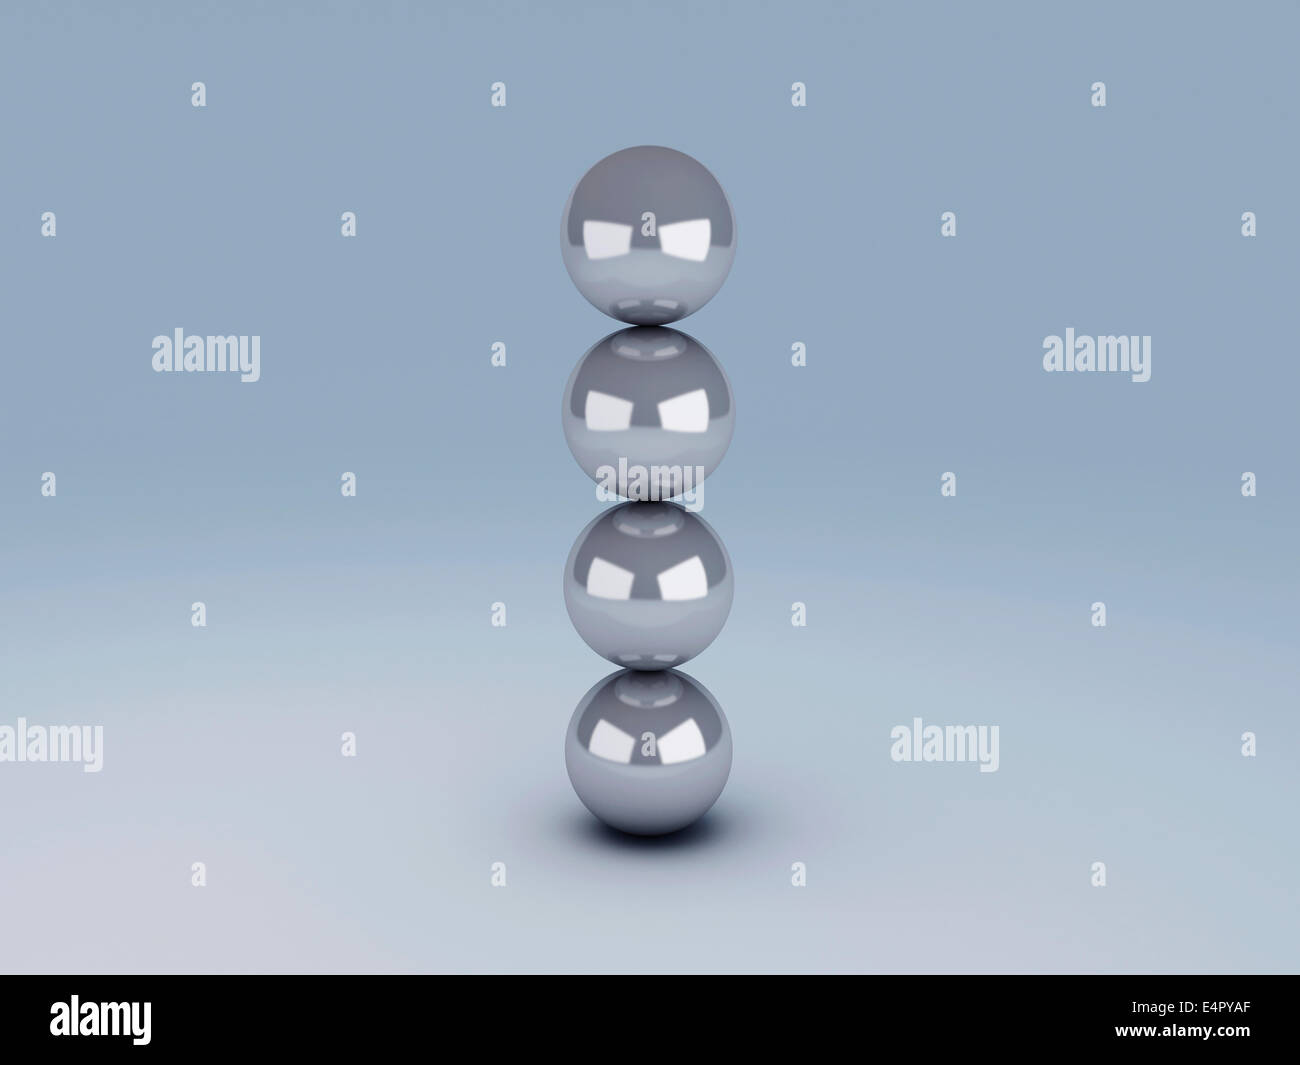 image of white spheres in equilibrium. 3d illustration Stock Photo